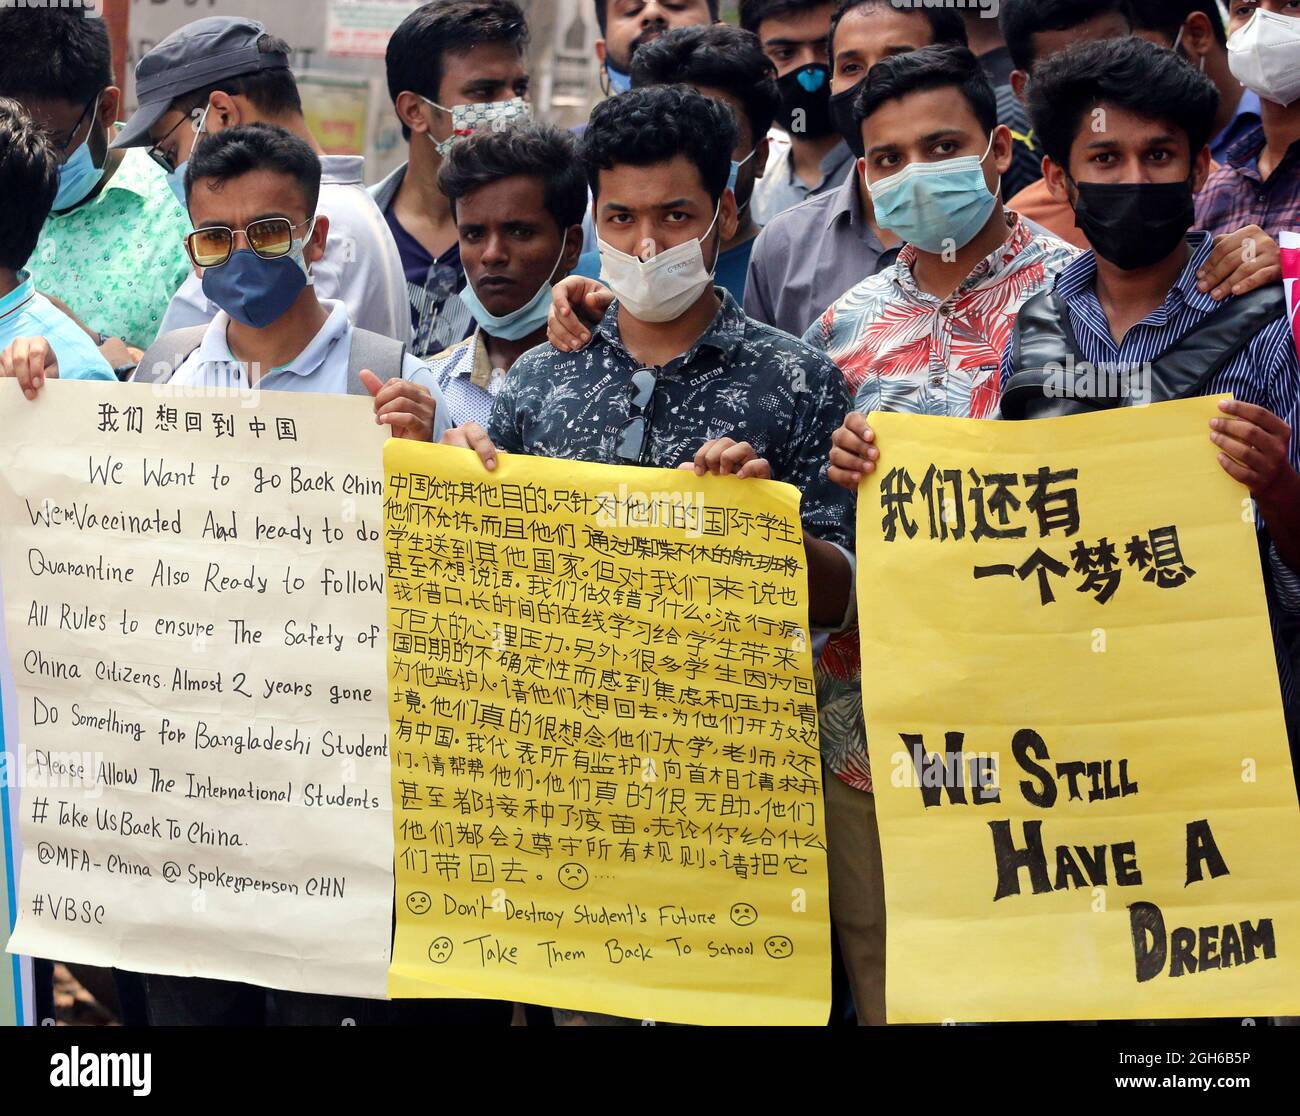 Bangladeshi students of different universities from China, hold placards during a protest, to demand the intervention of the Bangladesh government to can return to China. Students are stranded in Bangladesh unable to return to China, due to the closed borders  by coronavirus pandemic. On September 5, 2021in Dhaka, Bangladesh. (Photo by Habibur Rahman / Eyepix Group) Stock Photo